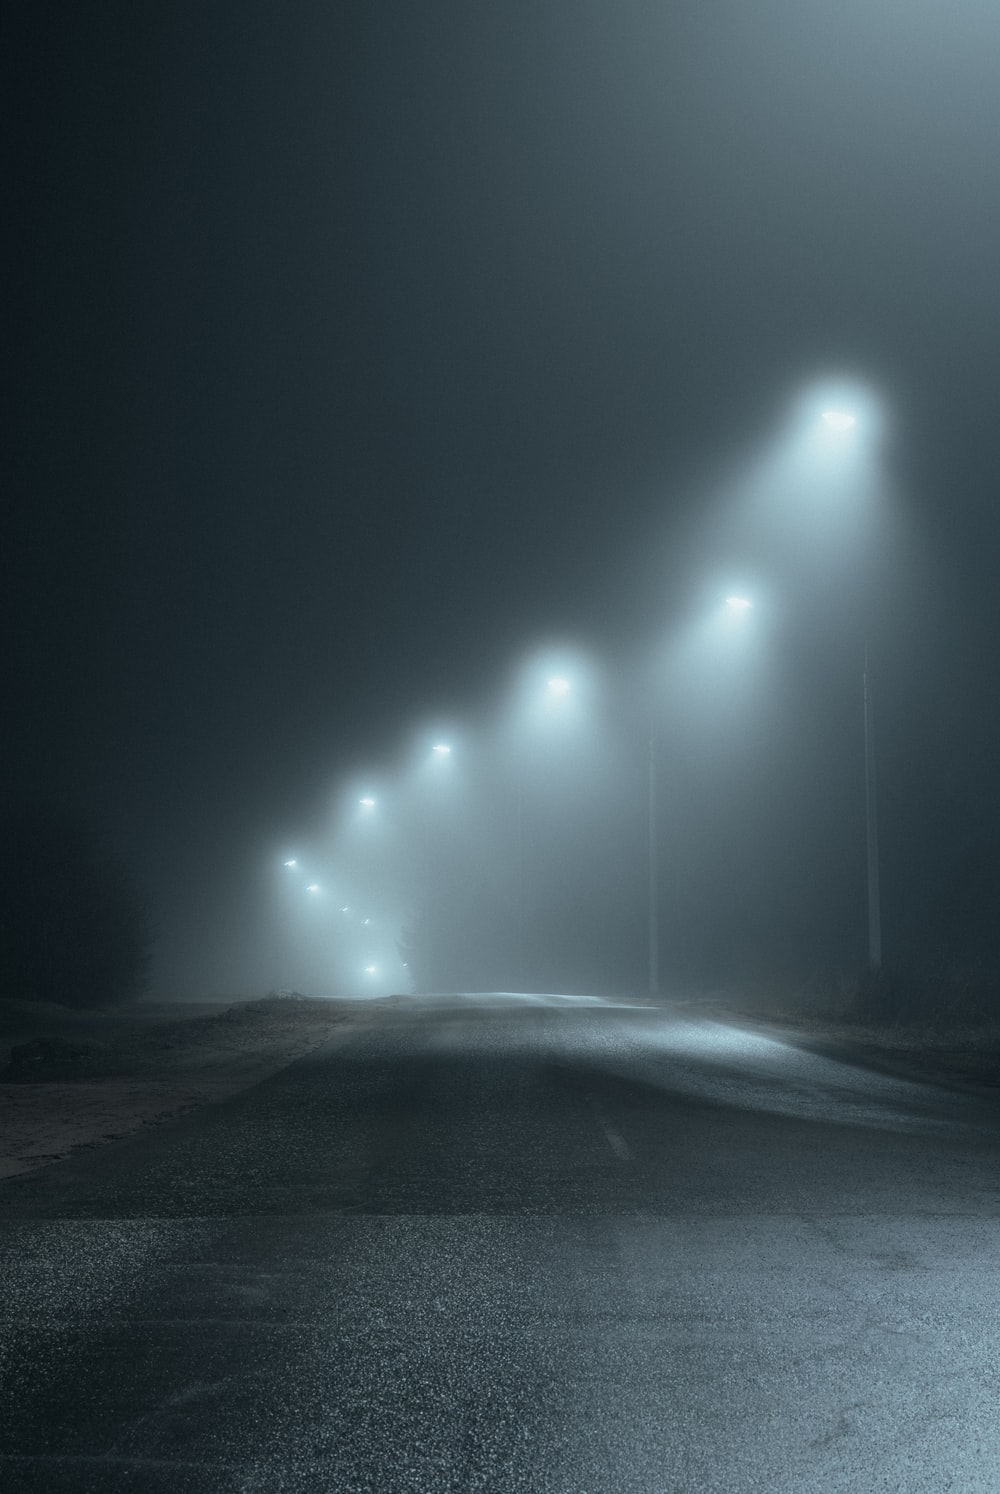 Foggy Street Picture. Download Free Image